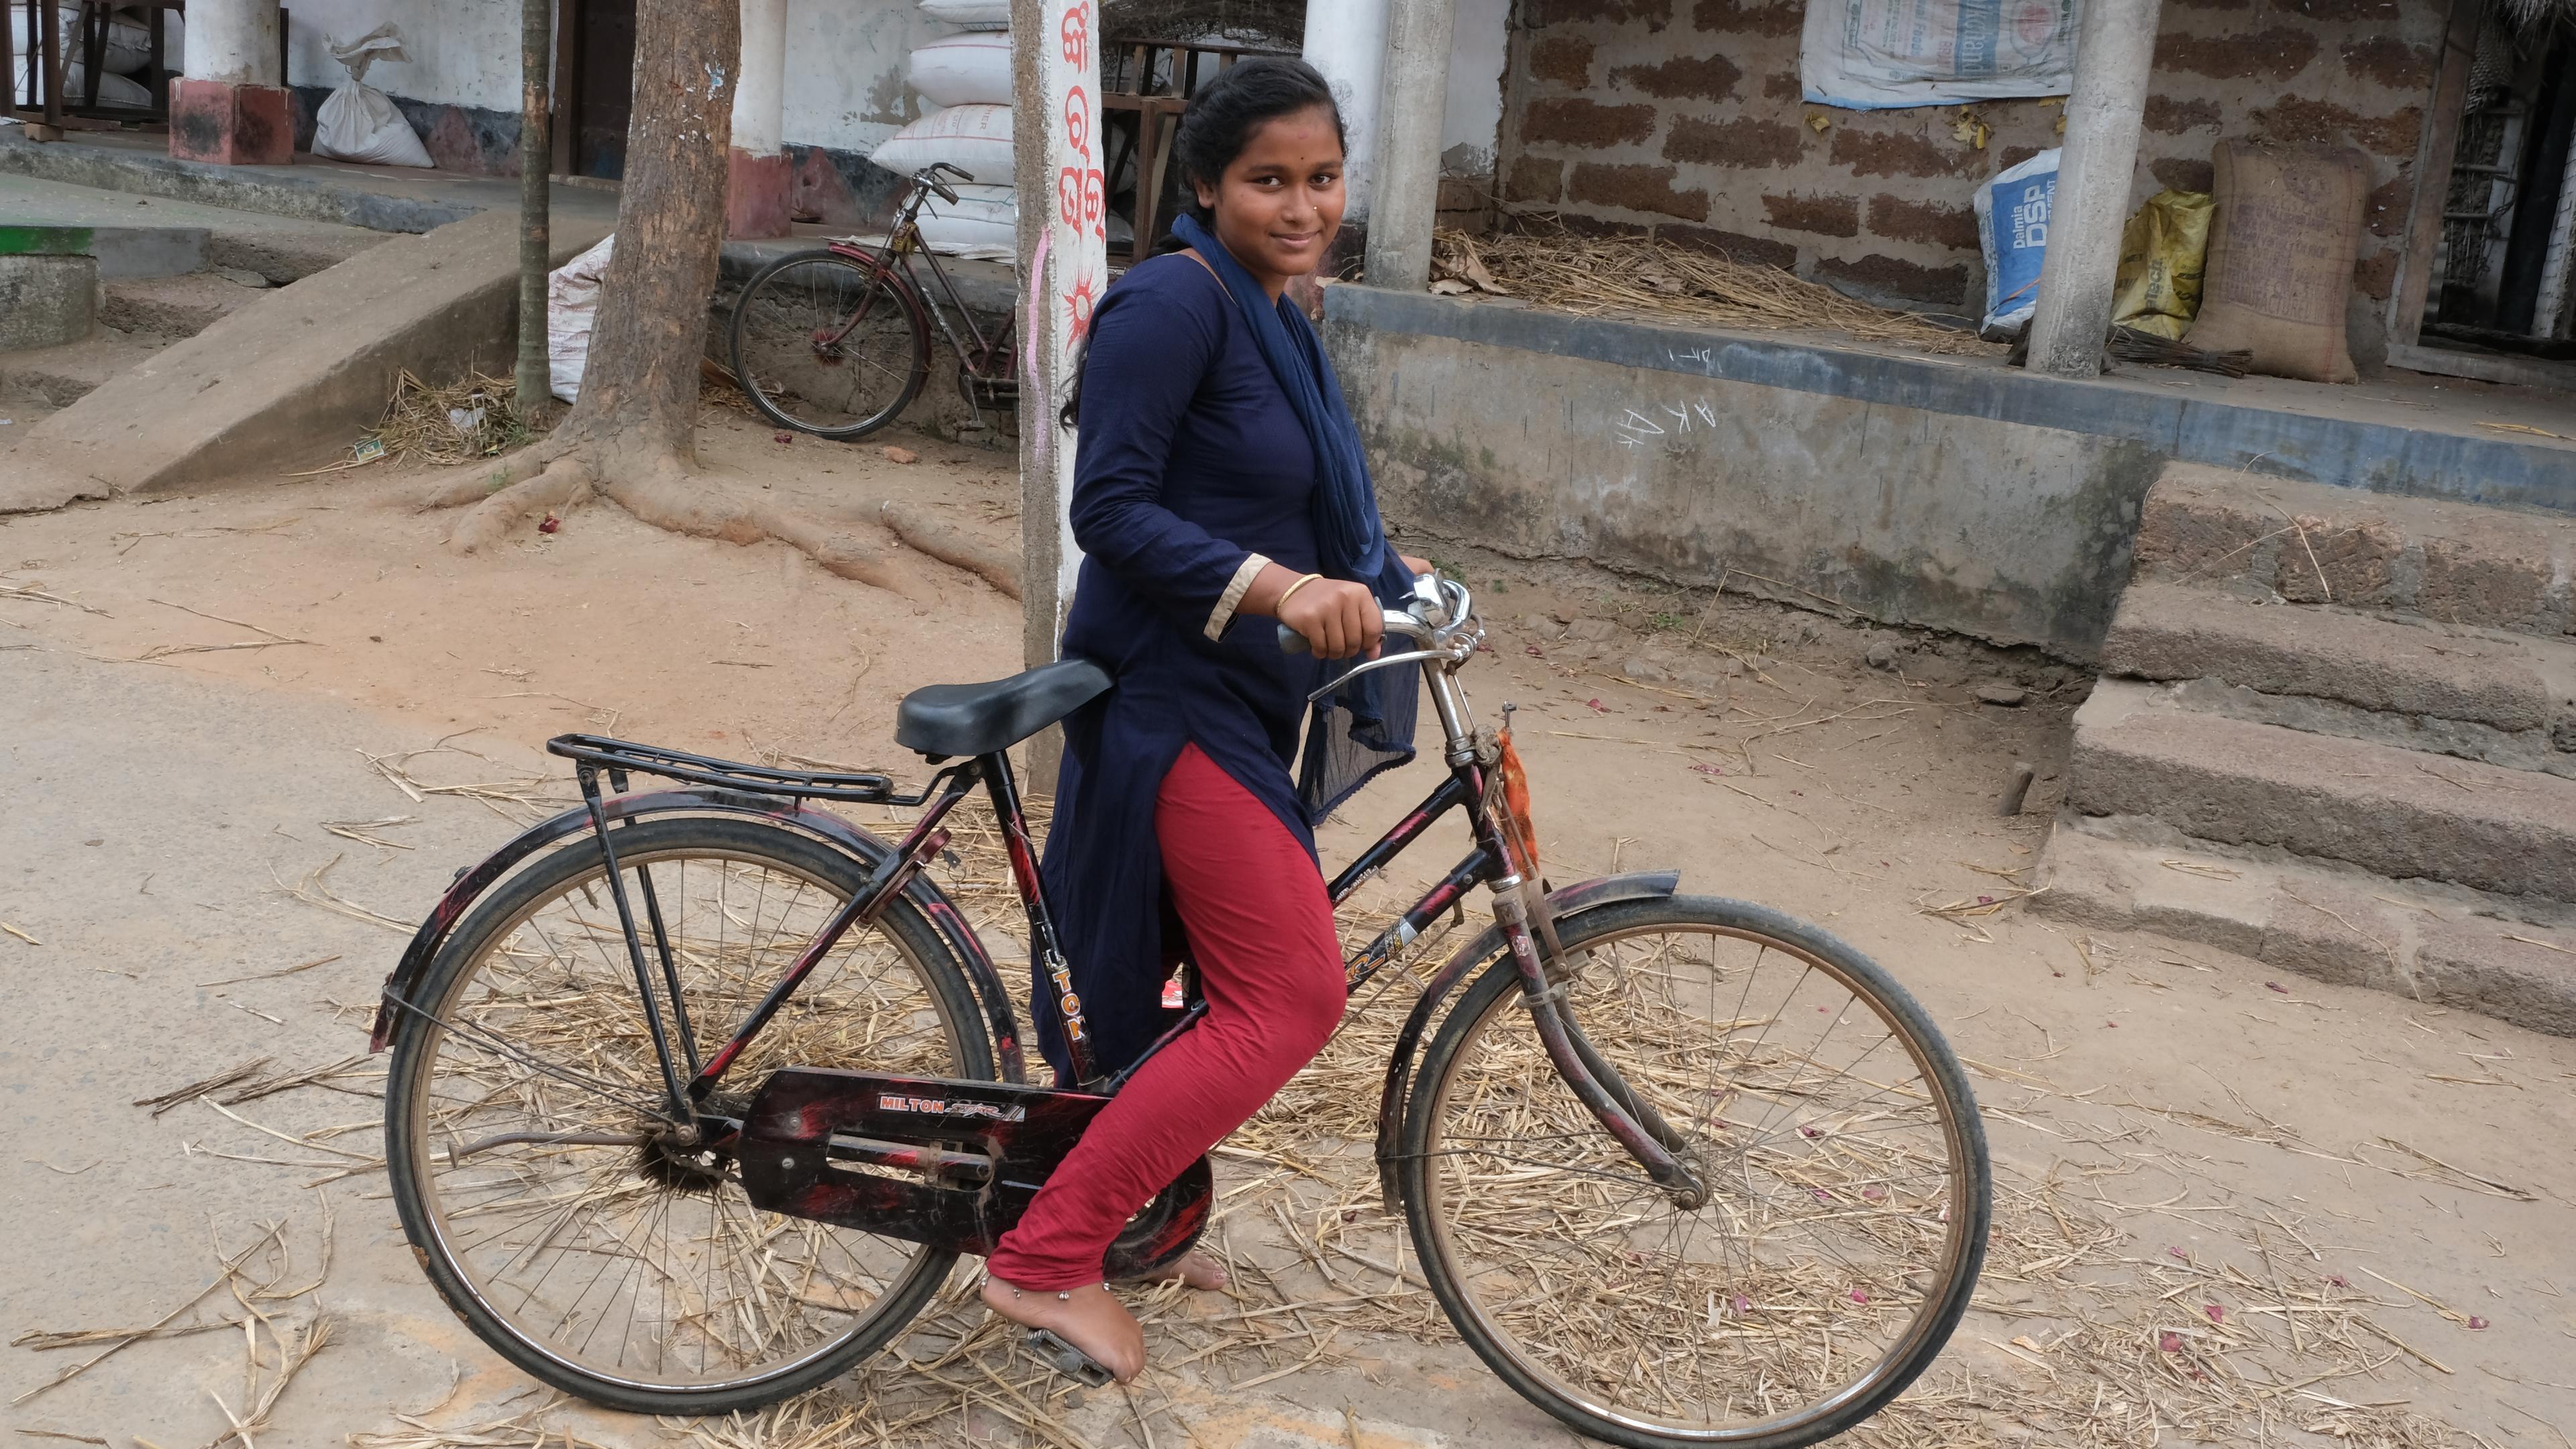 Young cataract patient from India, with bicycle